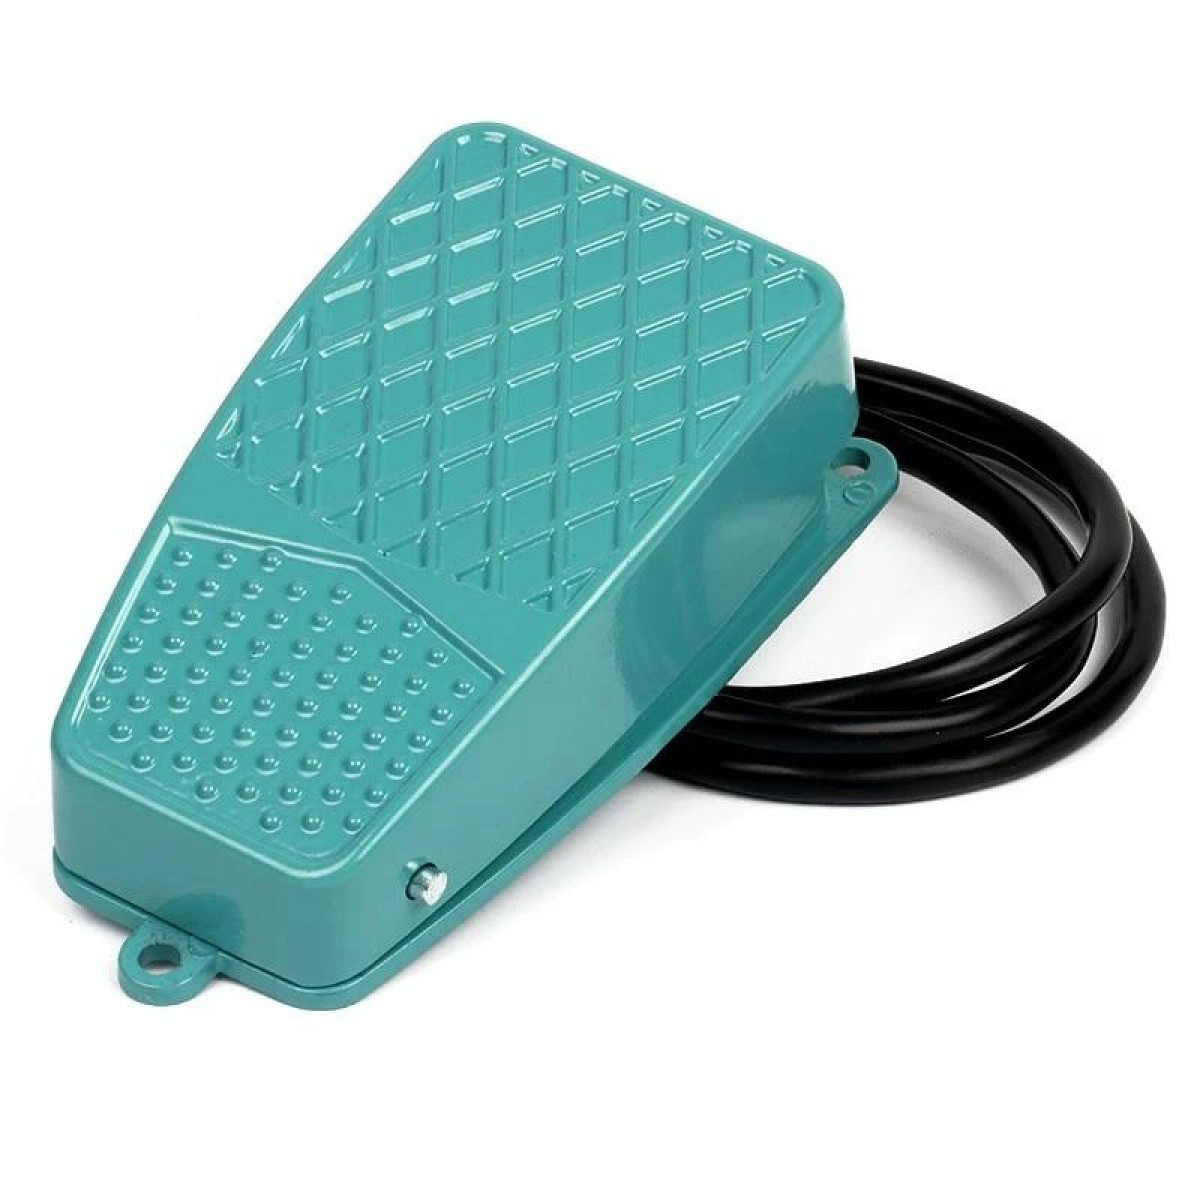 TFS-2 AC 250V 10A Anti-slip Metal Case Foot Control Pedal Switch, Cable Length: 90cm